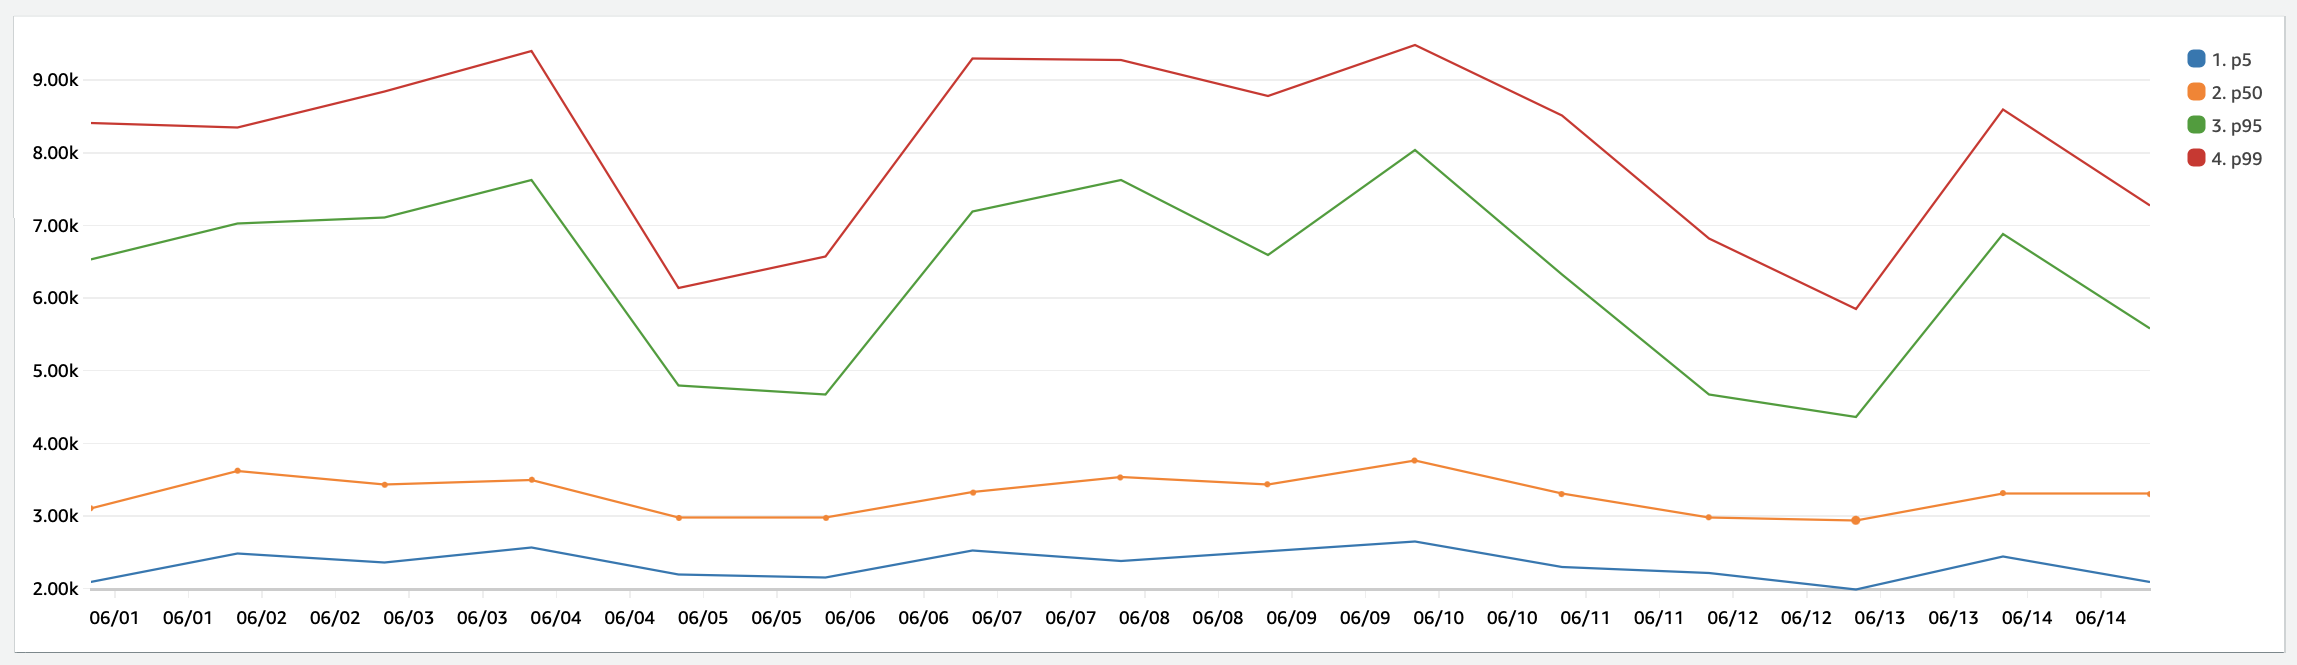 Rails cold start data from CloudWatch Insights. Shows percentiles for p5, p50, p95, and p99.